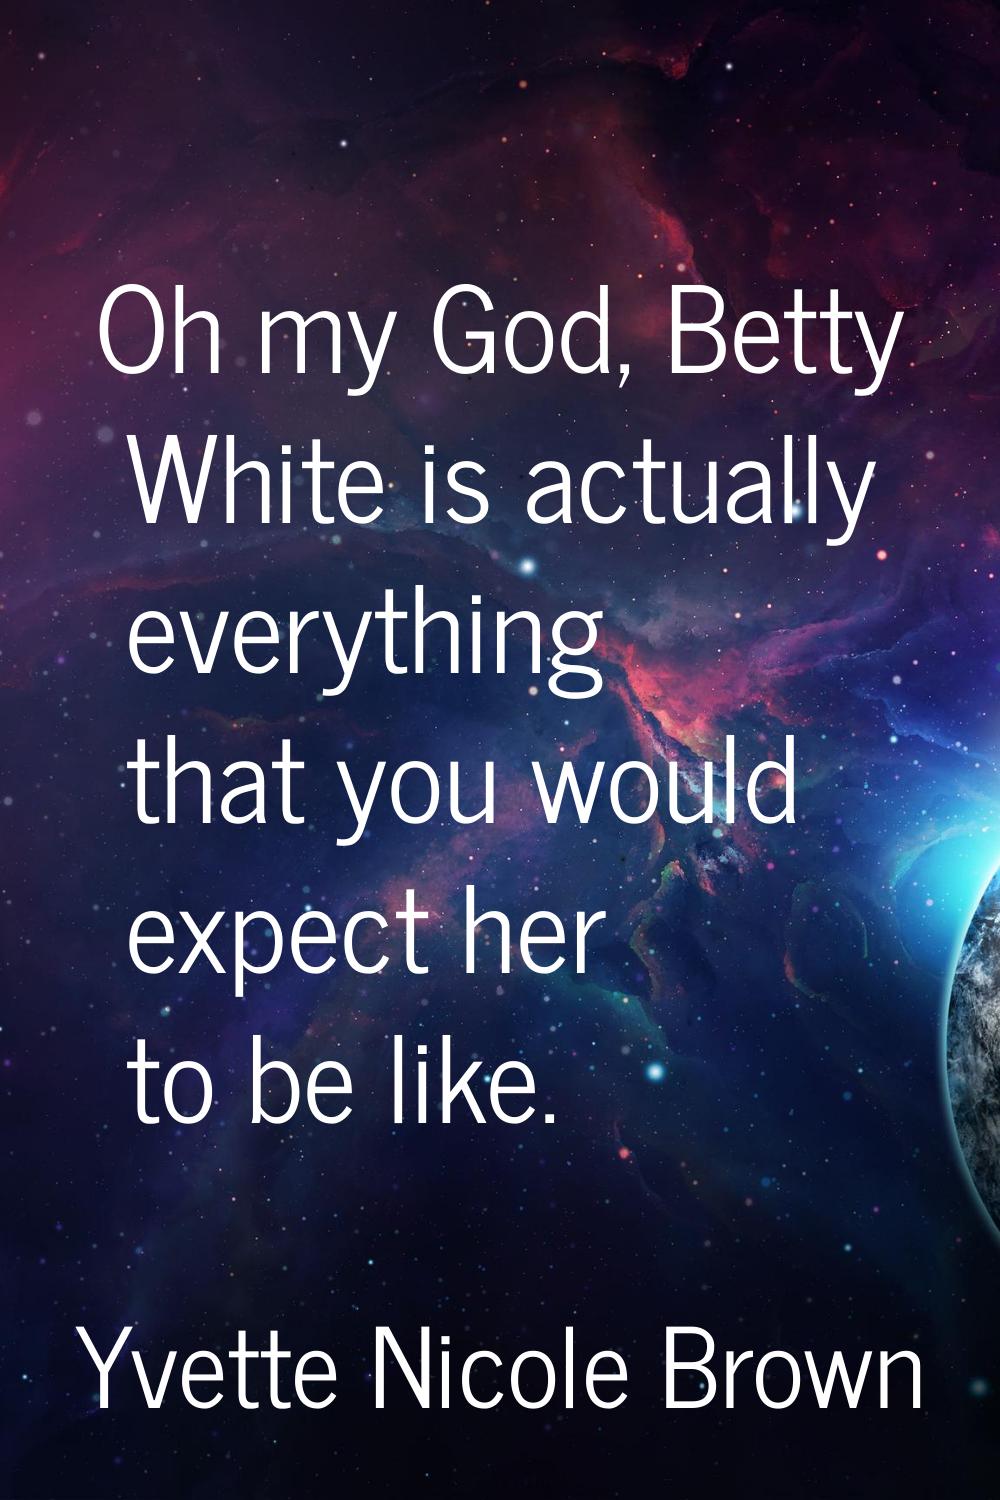 Oh my God, Betty White is actually everything that you would expect her to be like.